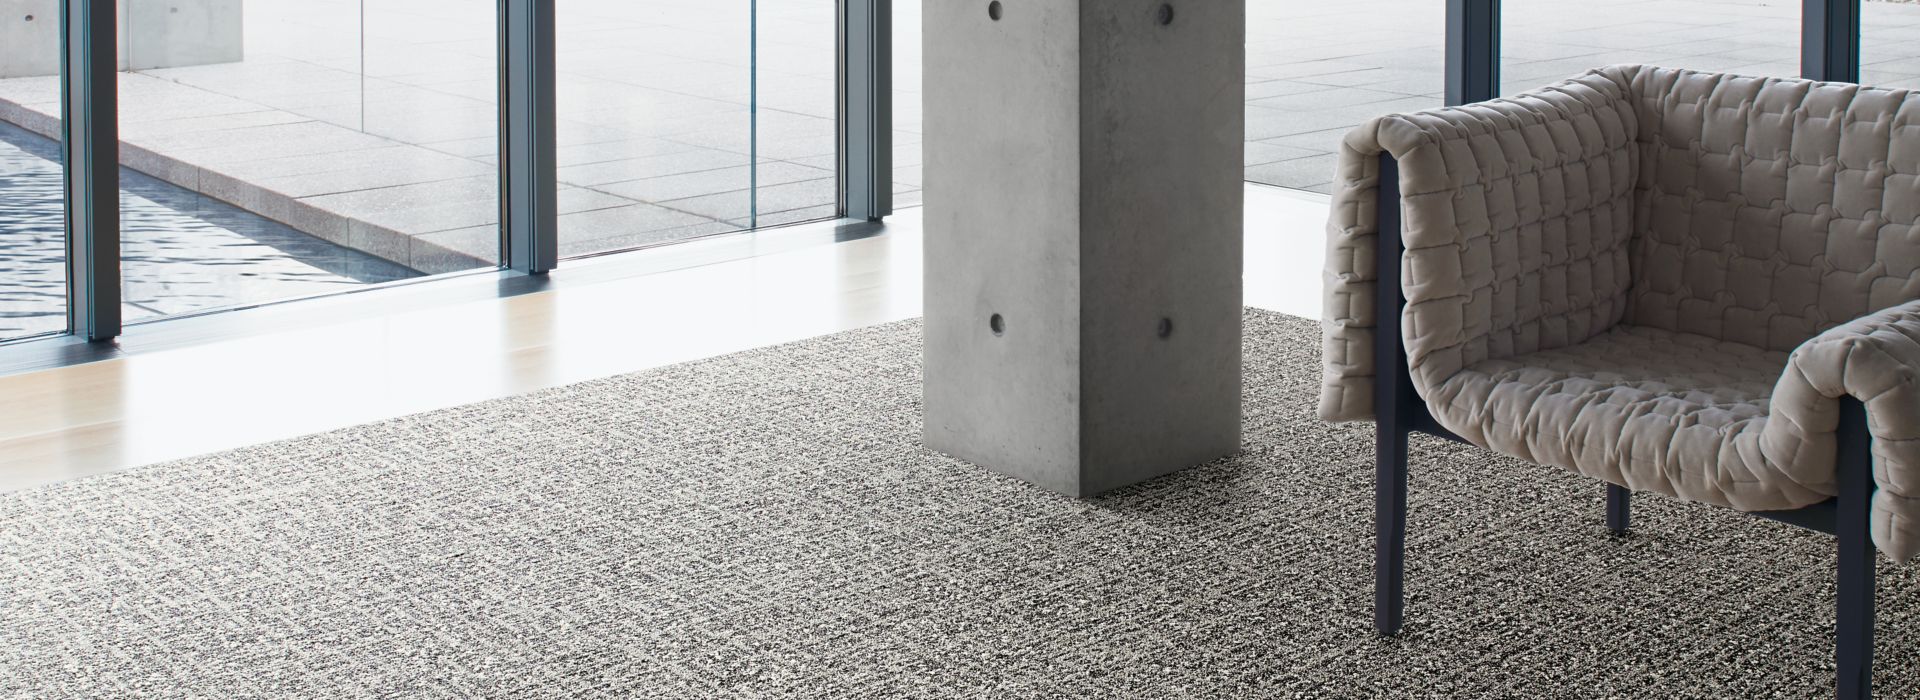 Interface WW890 plank carpet tile and Textured Stones LVT in lobby area with chair afbeeldingnummer 1